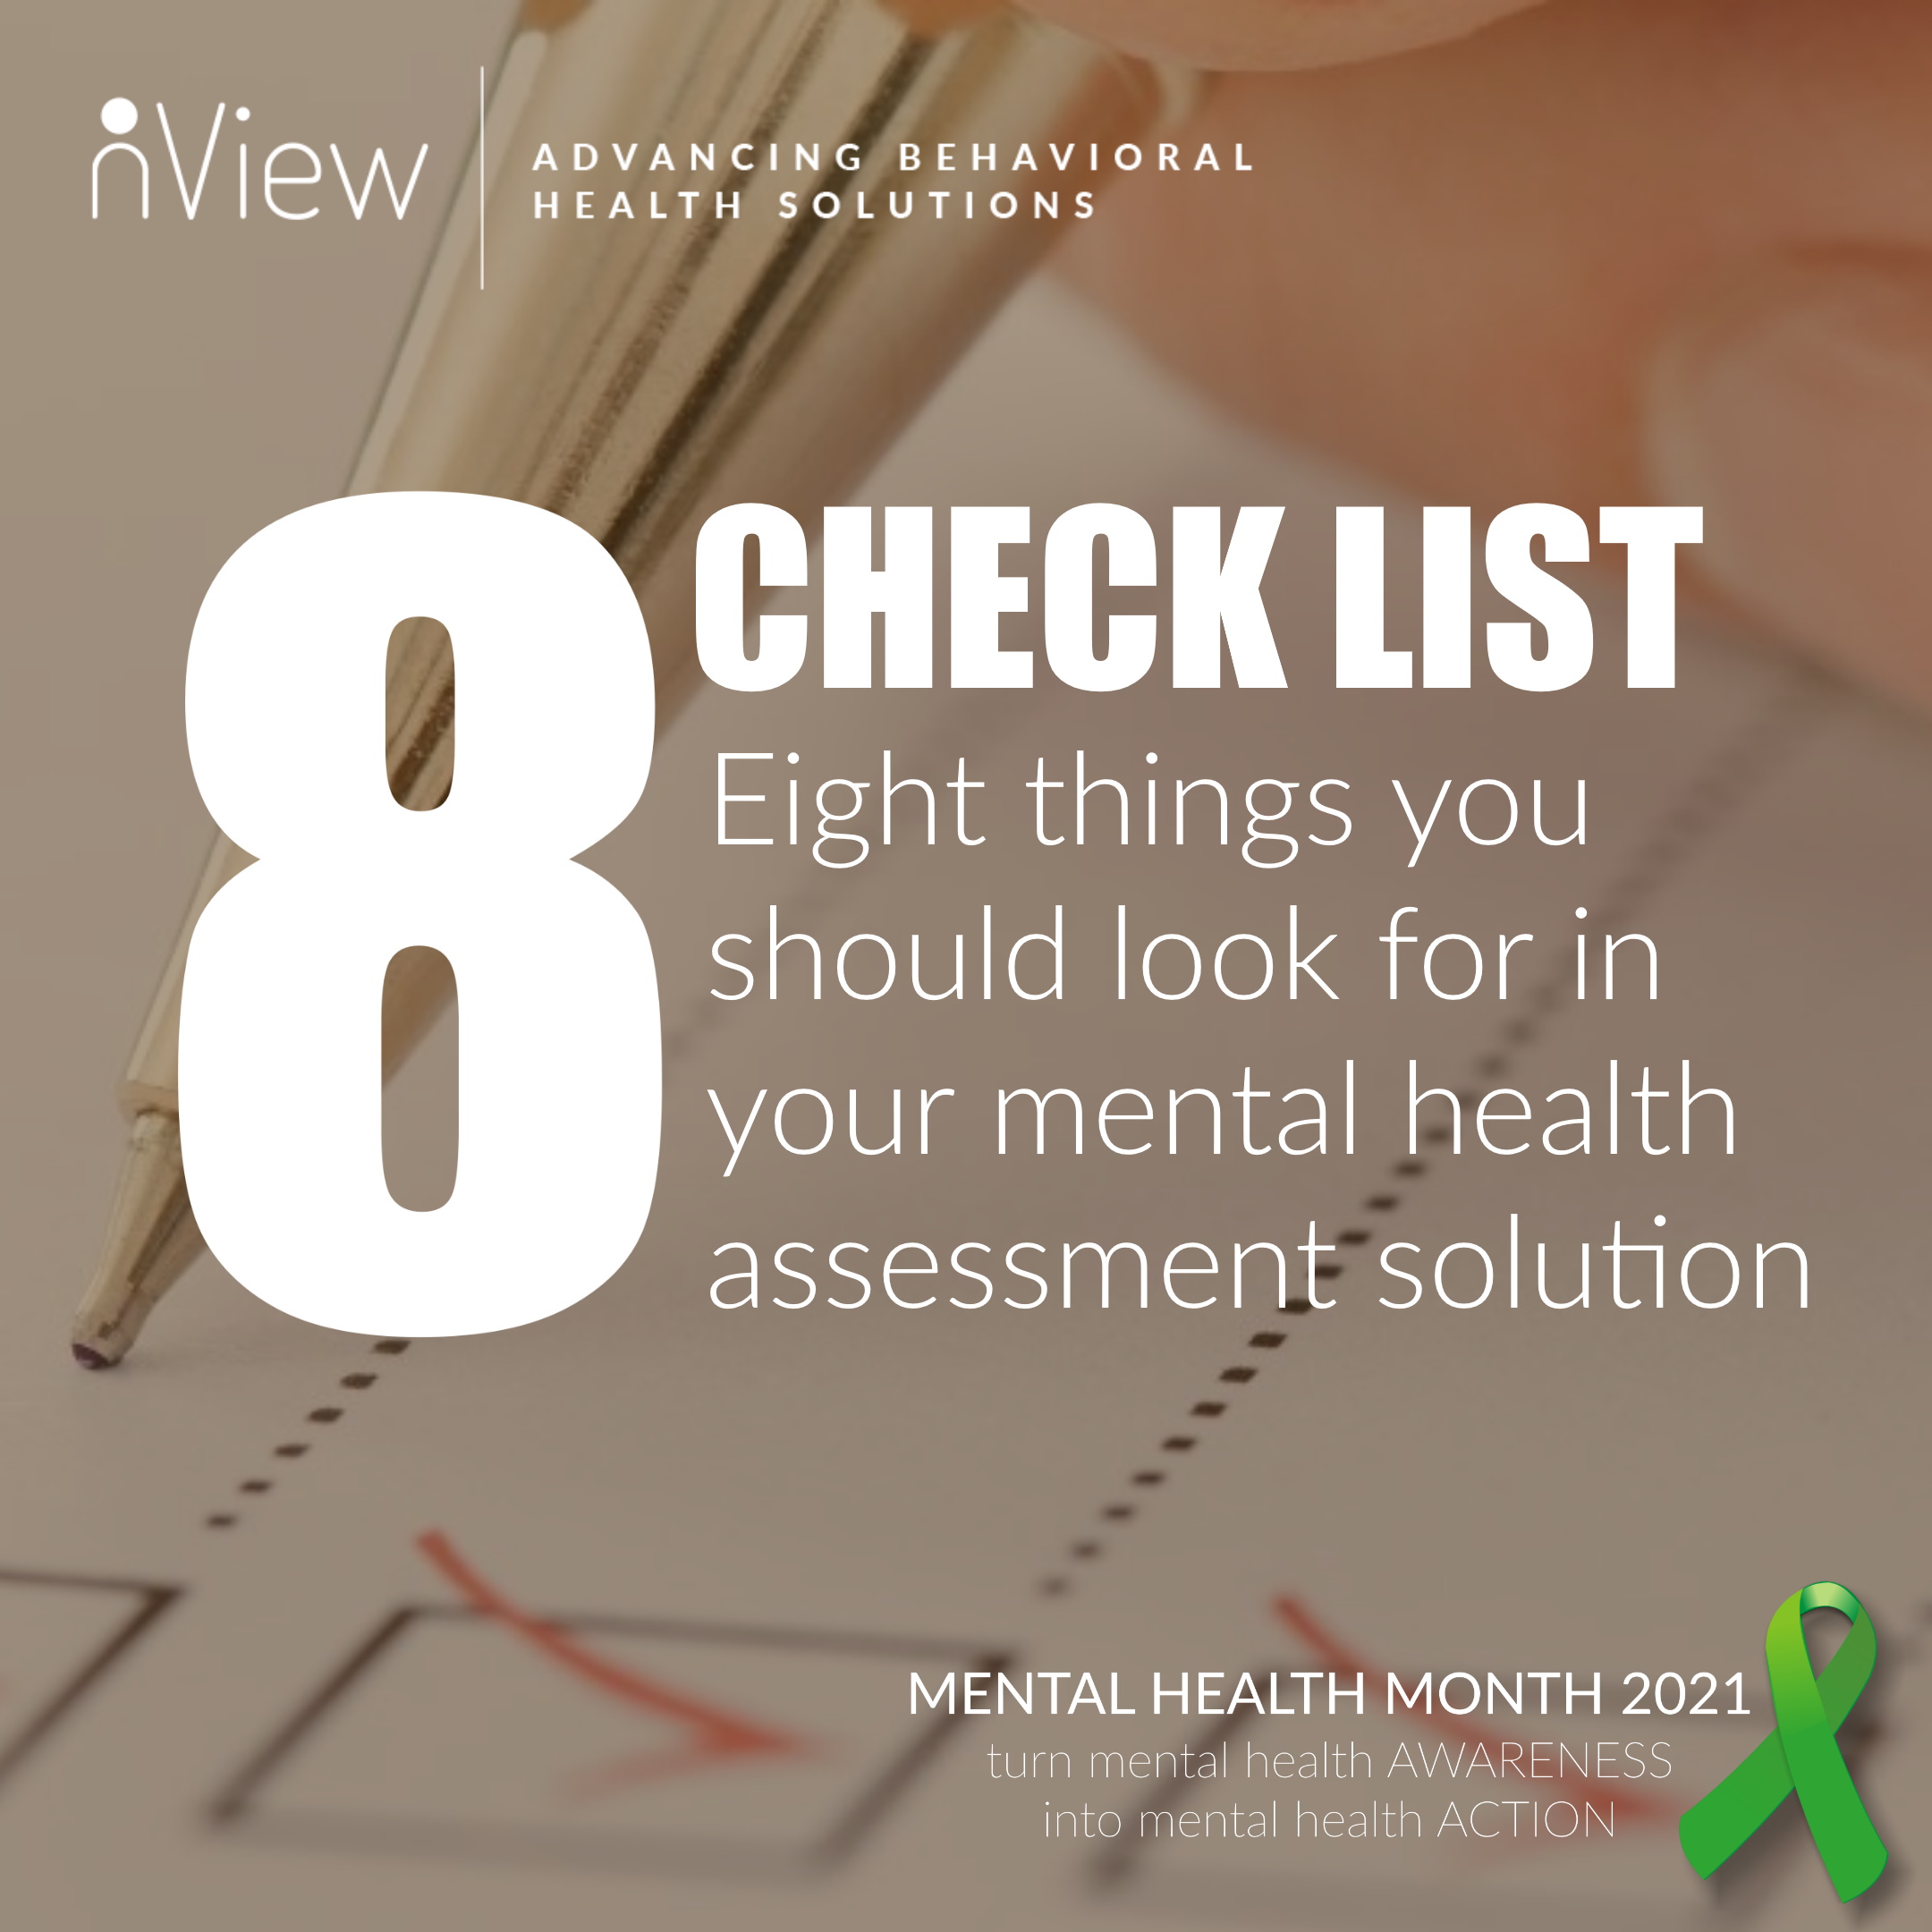 Mental Health Assessments: It’s Important to Know the Difference